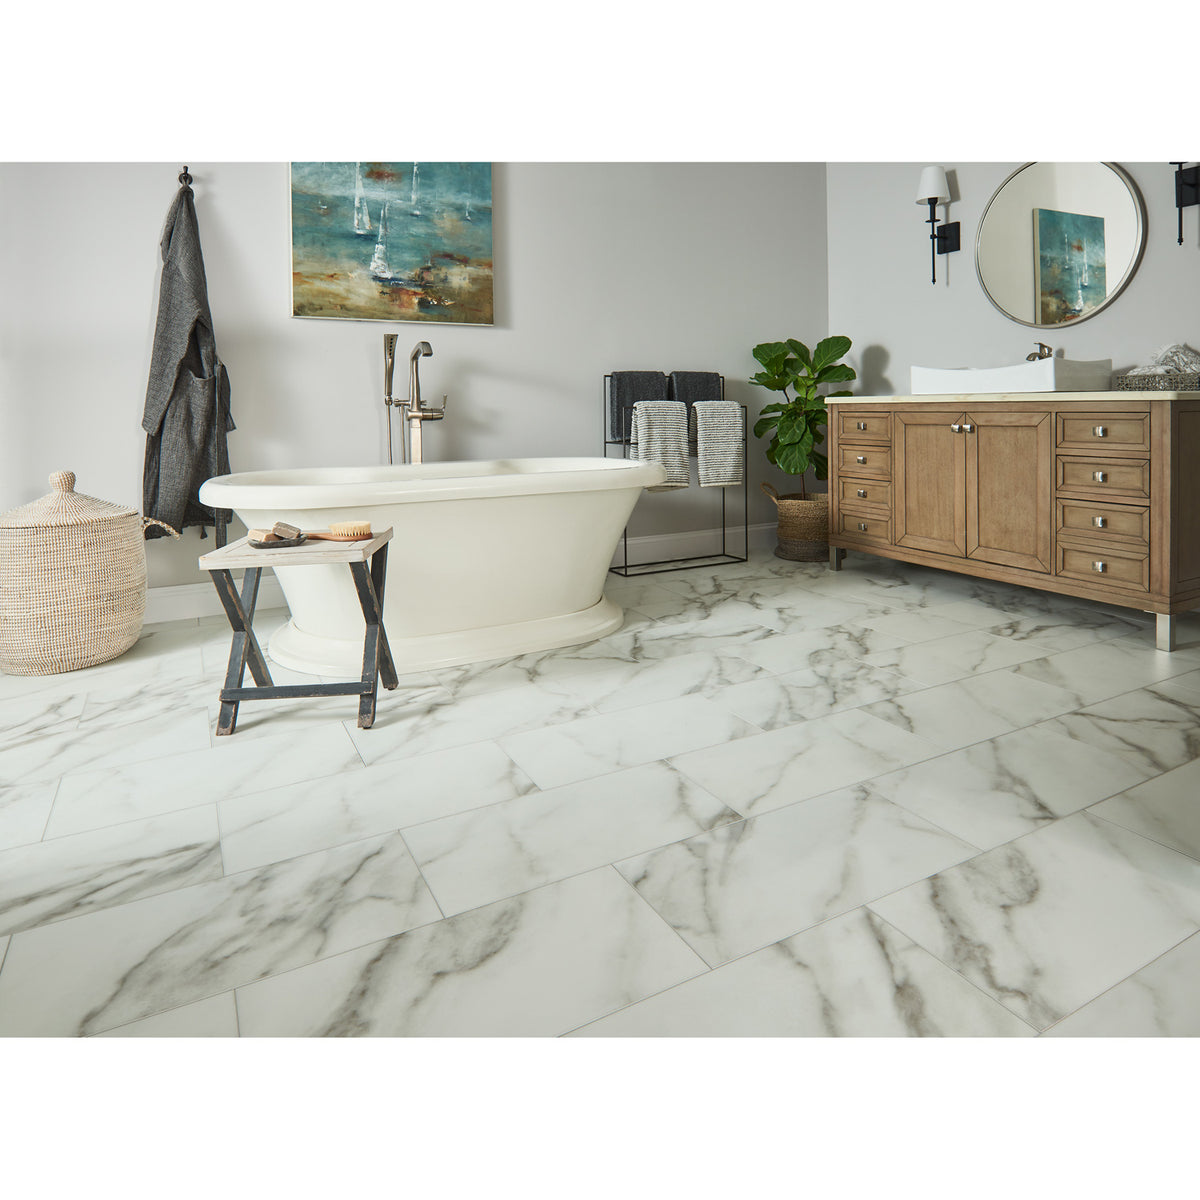 Bruce - Lifeseal Reserve Rigid Core - 12 in. x 24 in. - Marble Winter White Installed